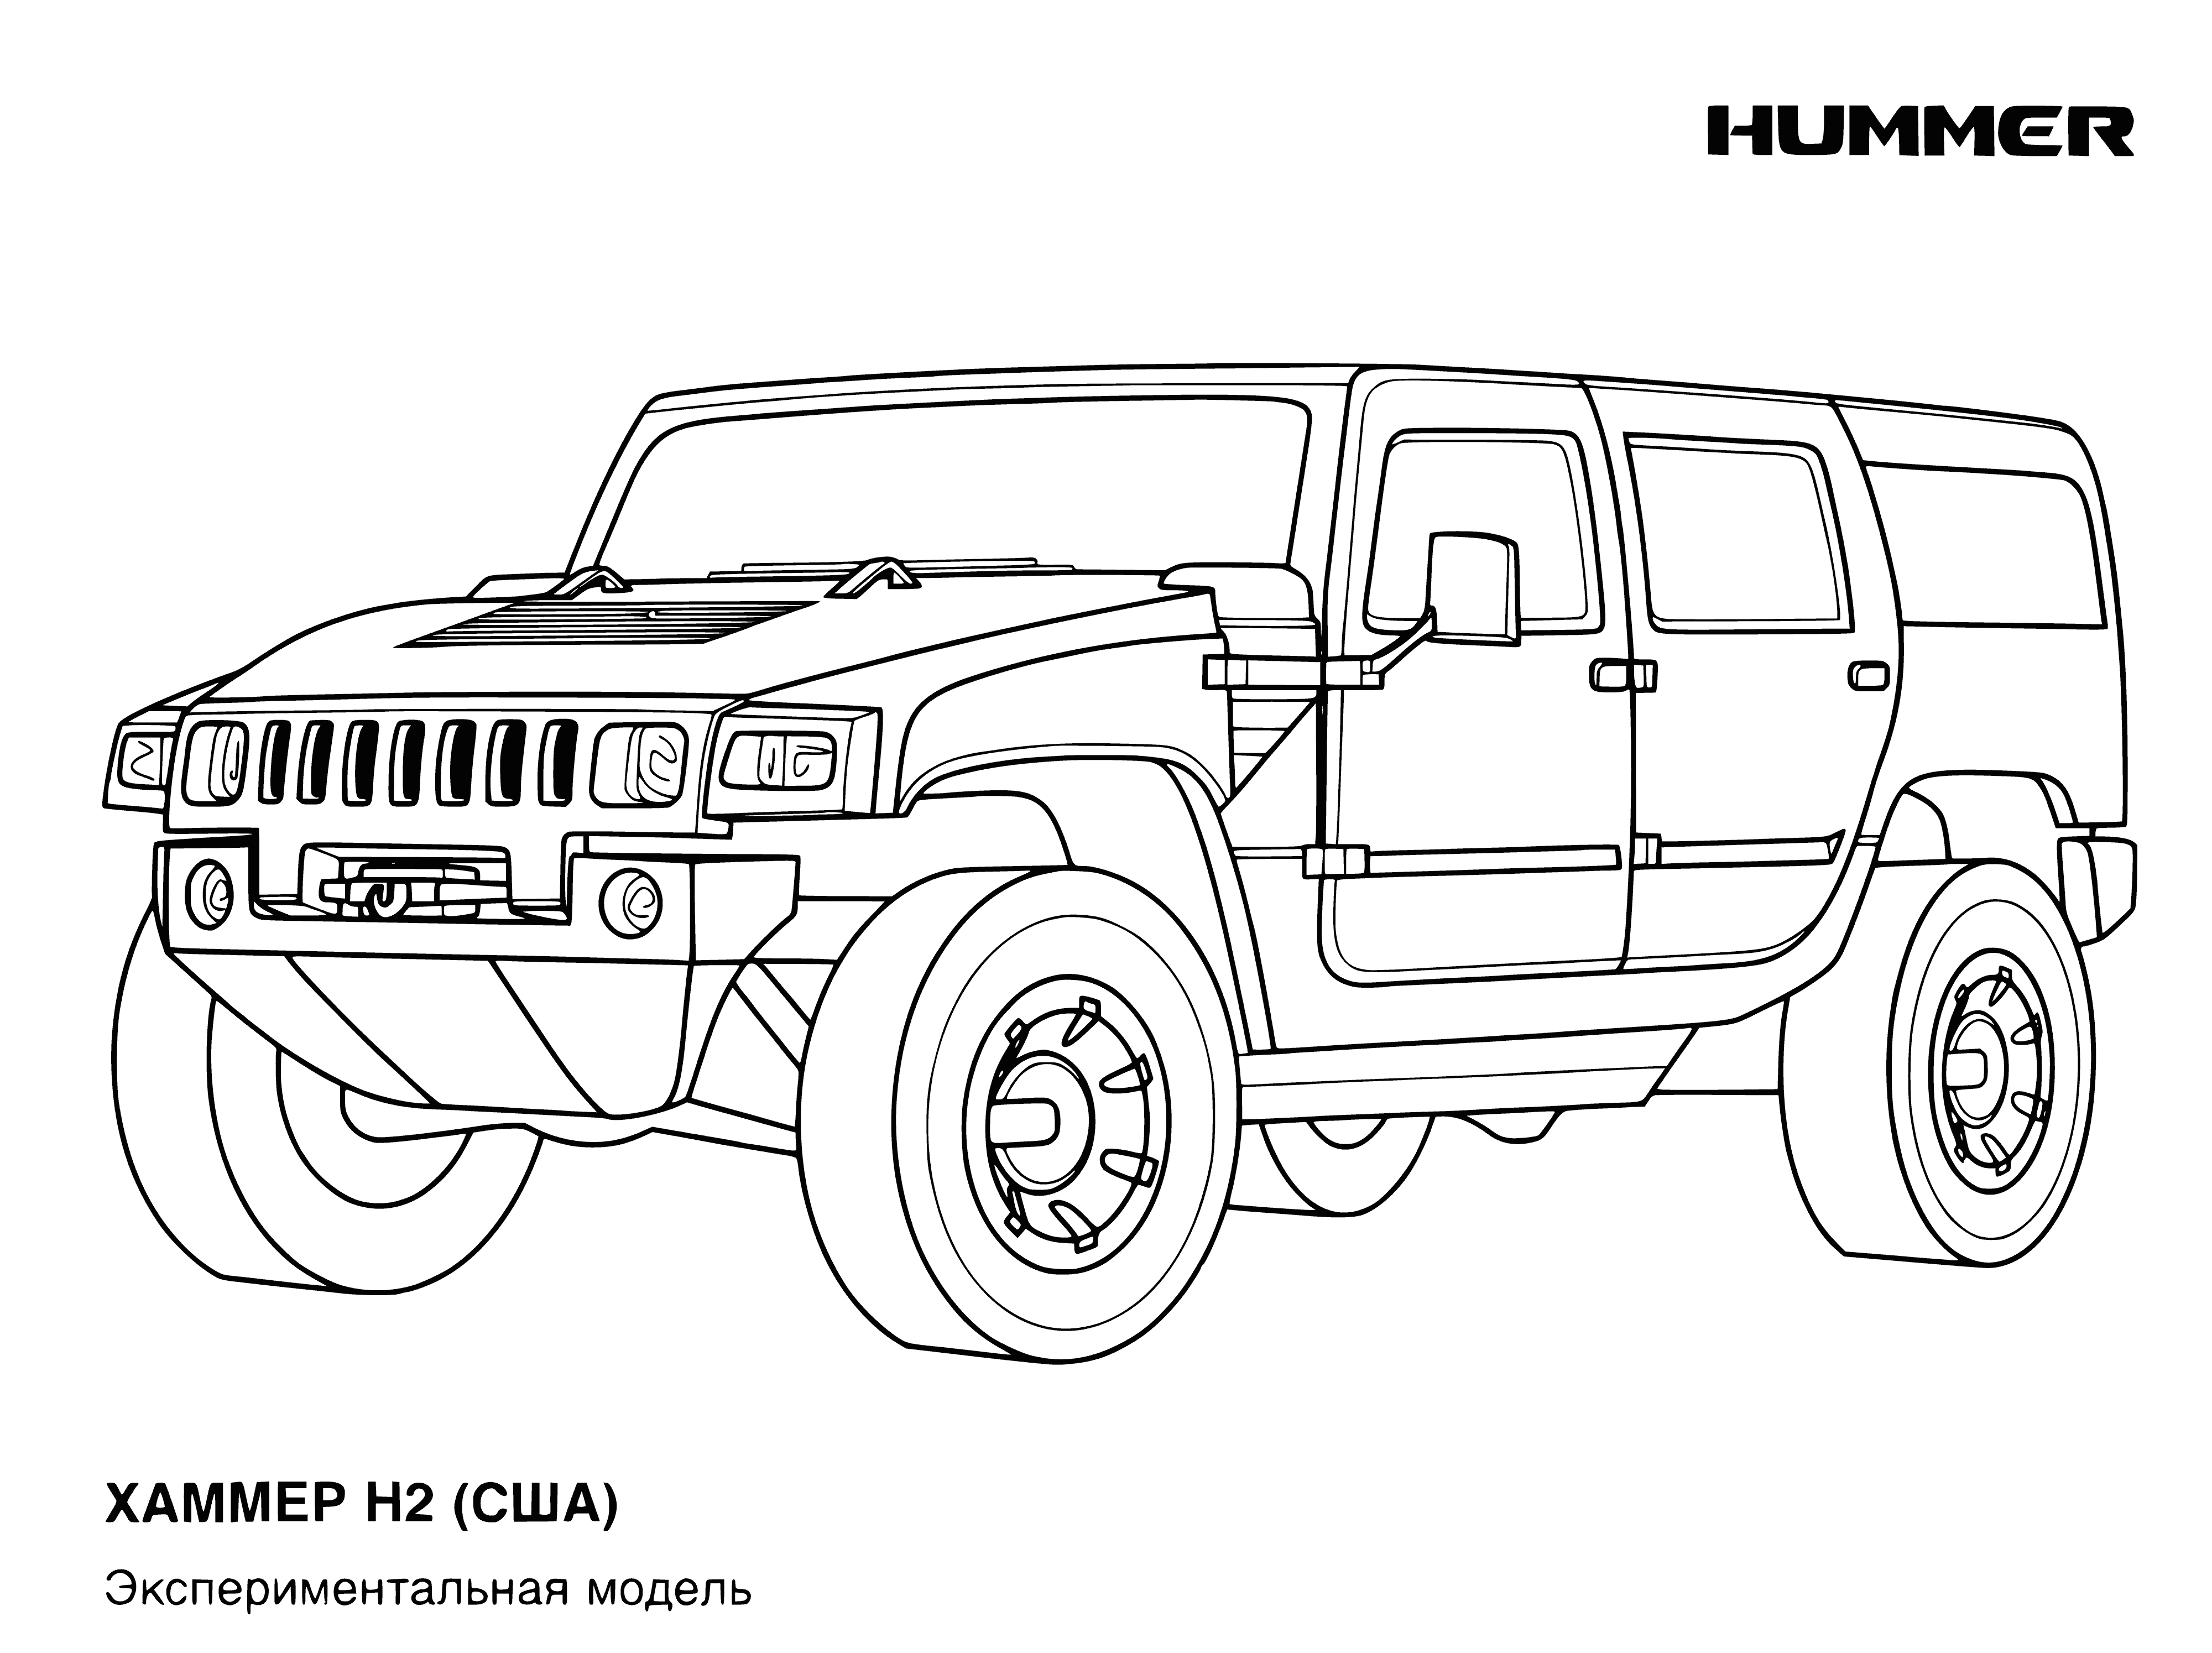 coloring page: Hammer USA offers two new cars: H3 sedan & H4 SUV in various colors with unique design elements & a variety of features. Safety is a priority.